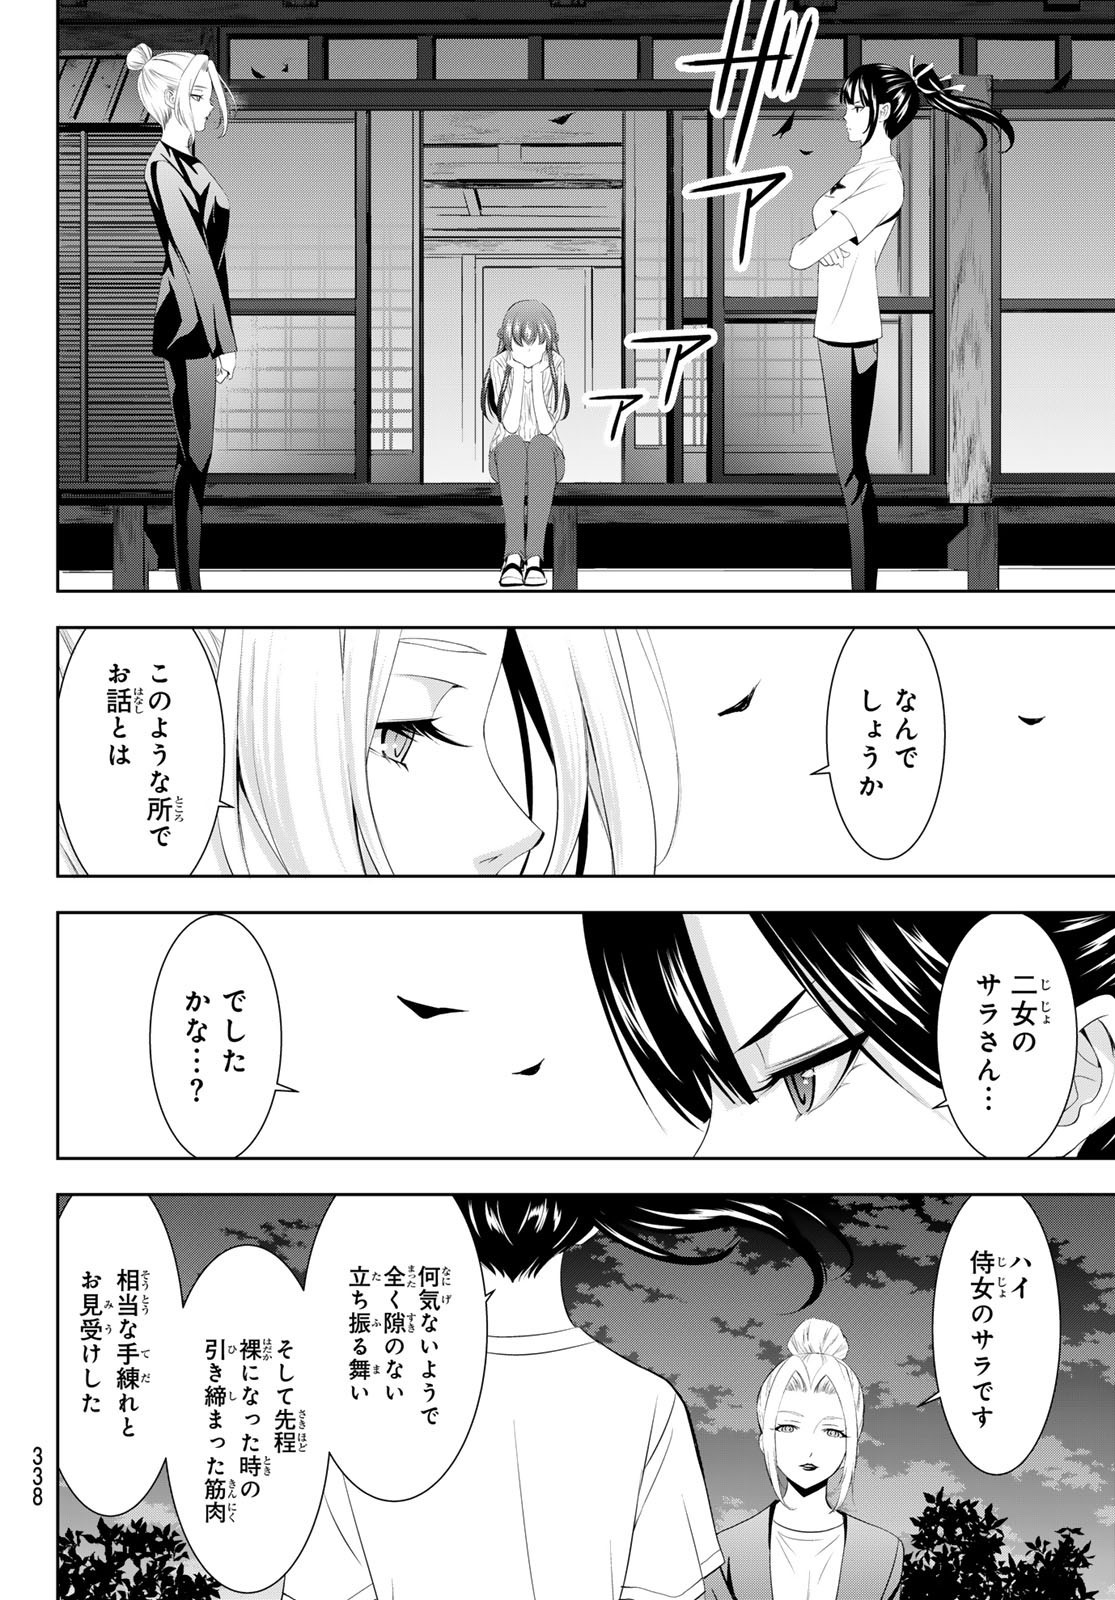 Goddess-Cafe-Terrace - Chapter 138 - Page 4